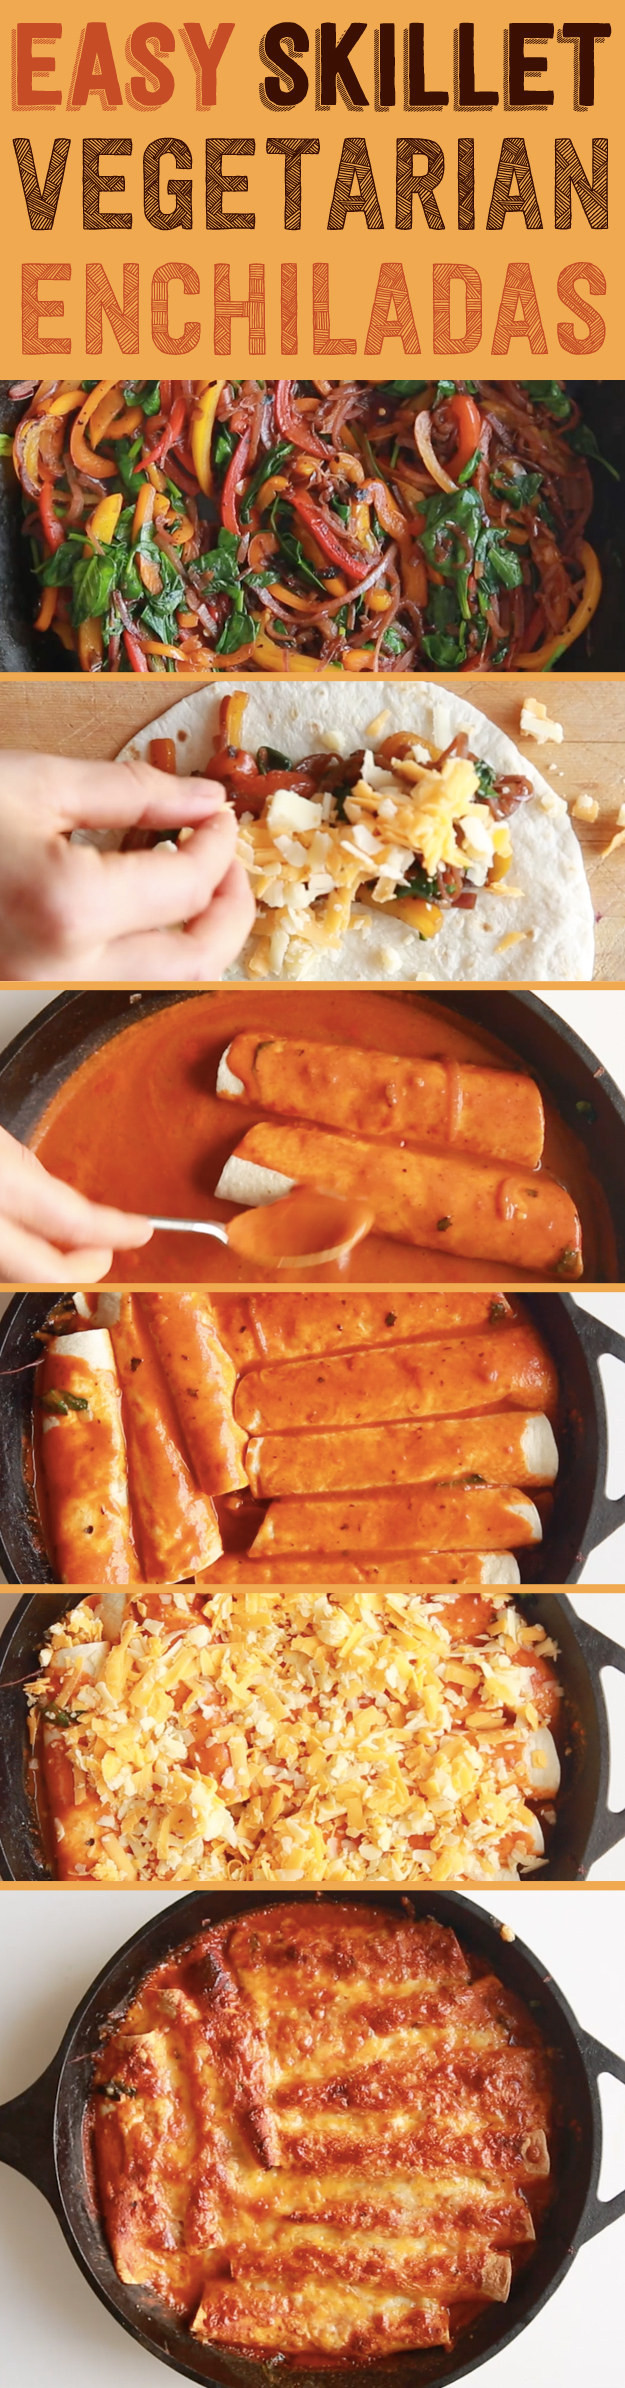 Easy Vegetarian Enchiladas
 These Easy Ve arian Enchiladas Will Be Your New Go To Meal